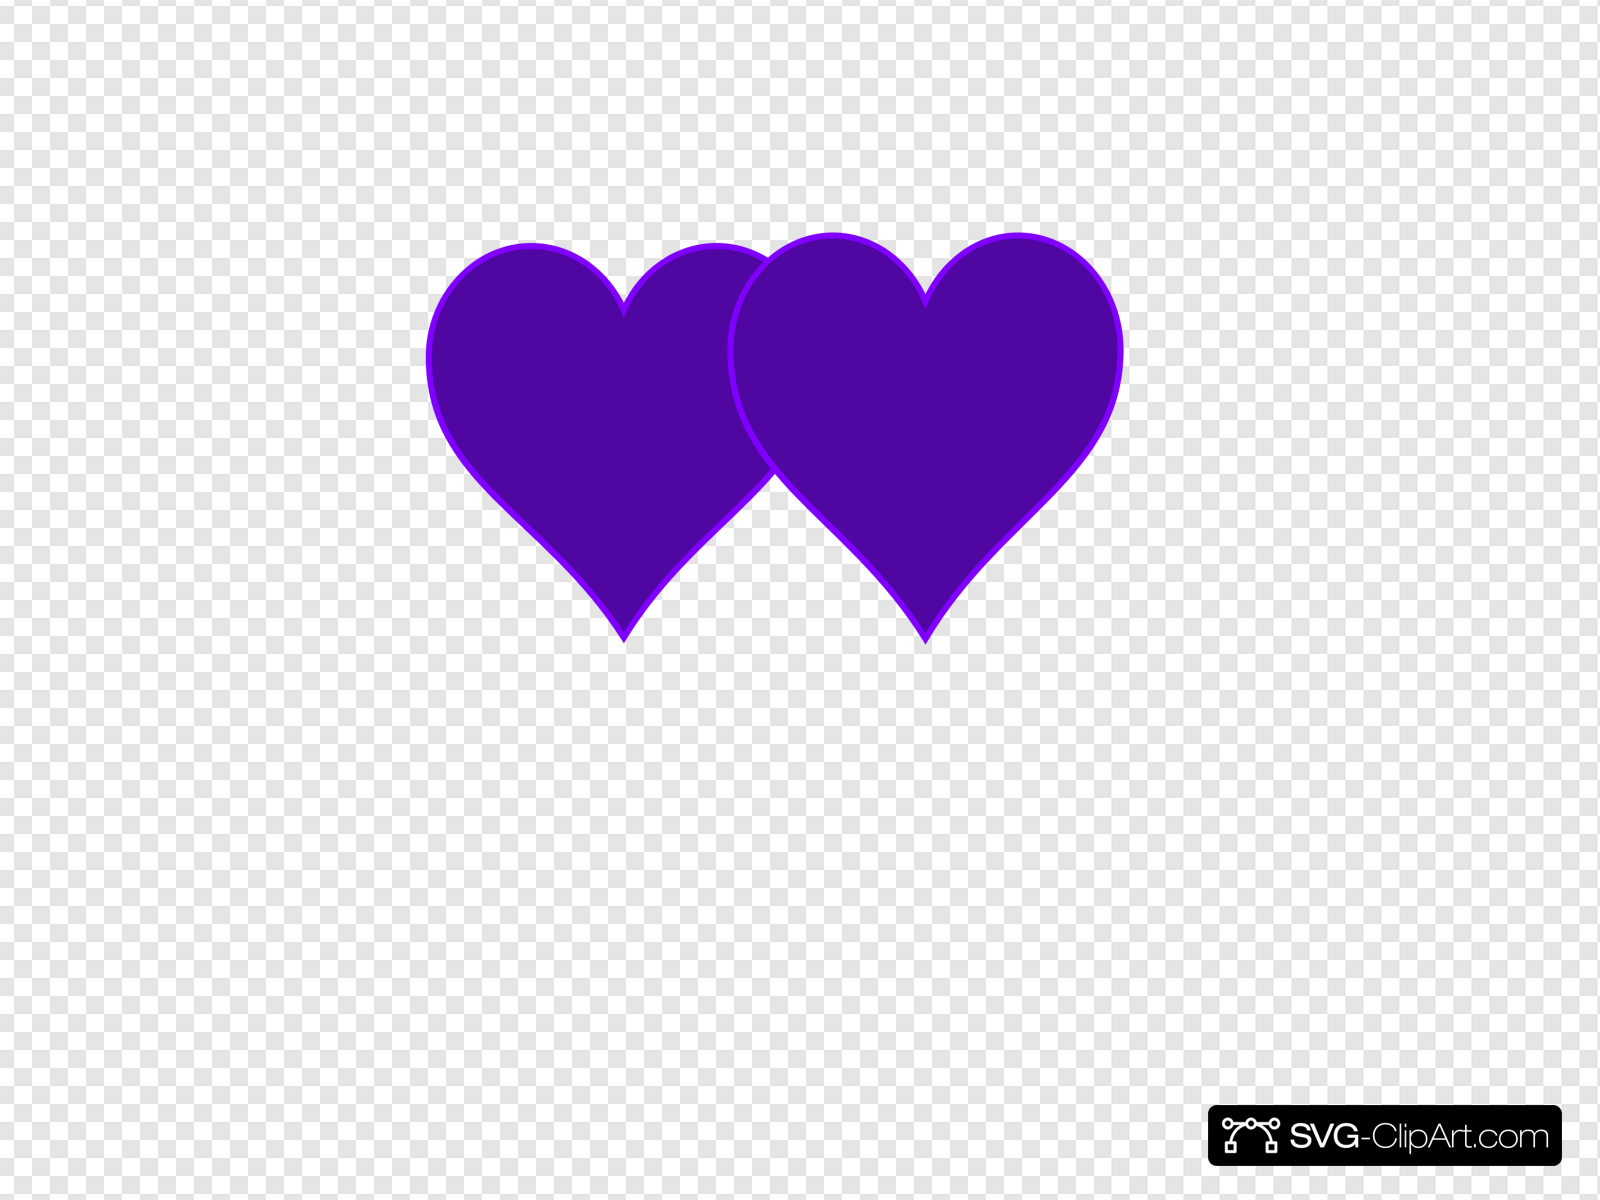 Double Lined Purple Hearts Clip art, Icon and SVG